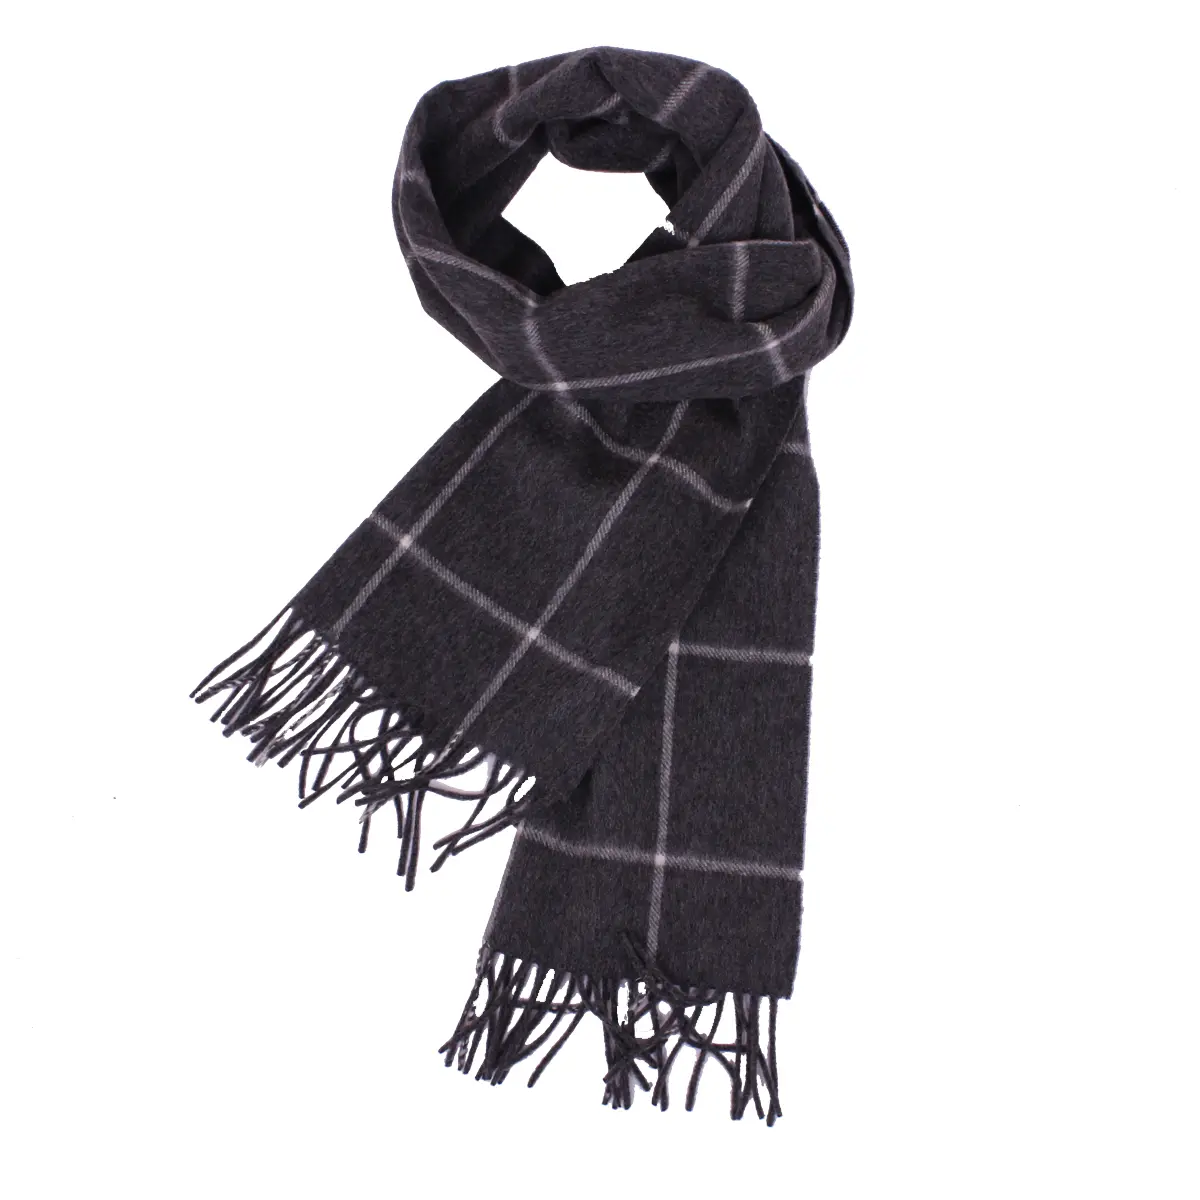 Charcoal Large Windowpane Cashmere Scarf  Robert Old   